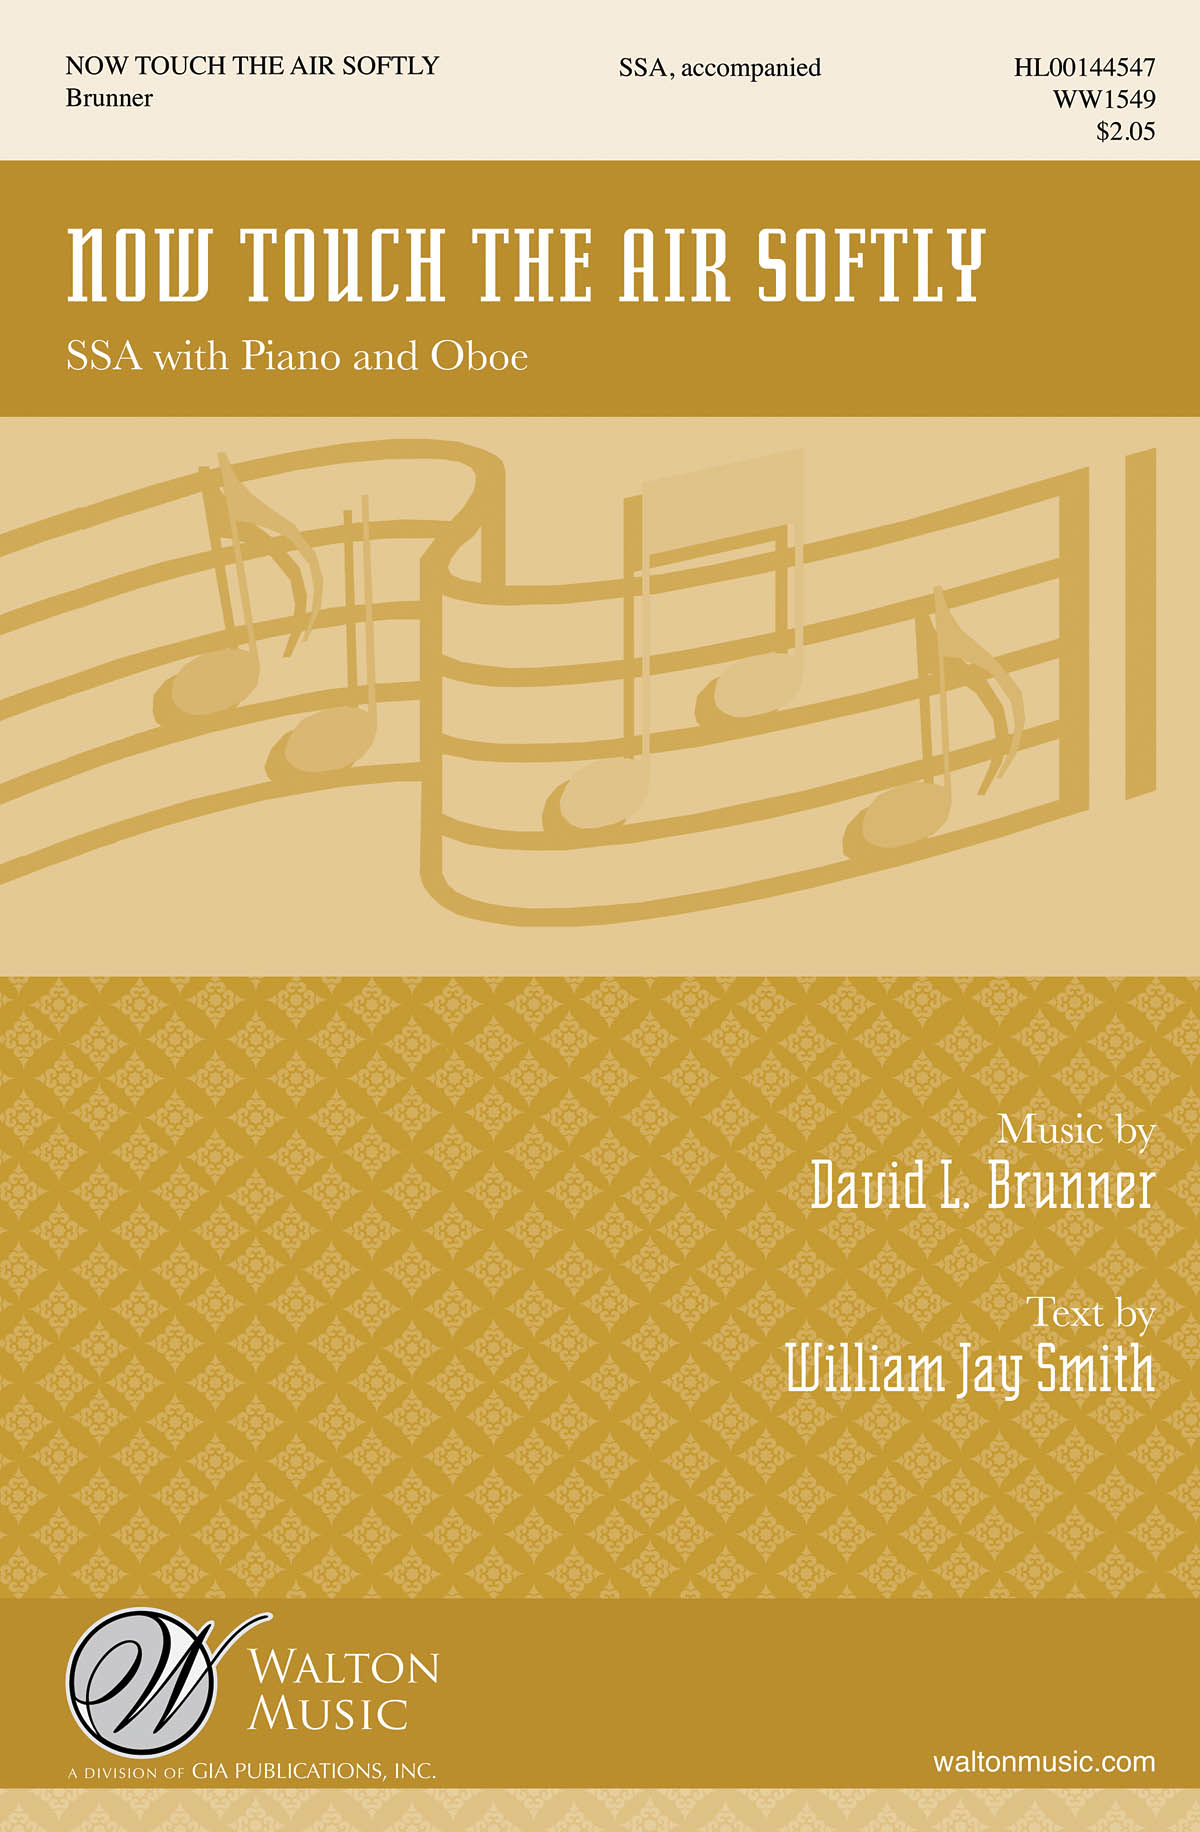 David L. Brunner: Now Touch The Air Softly: Upper Voices a Cappella: Vocal Score